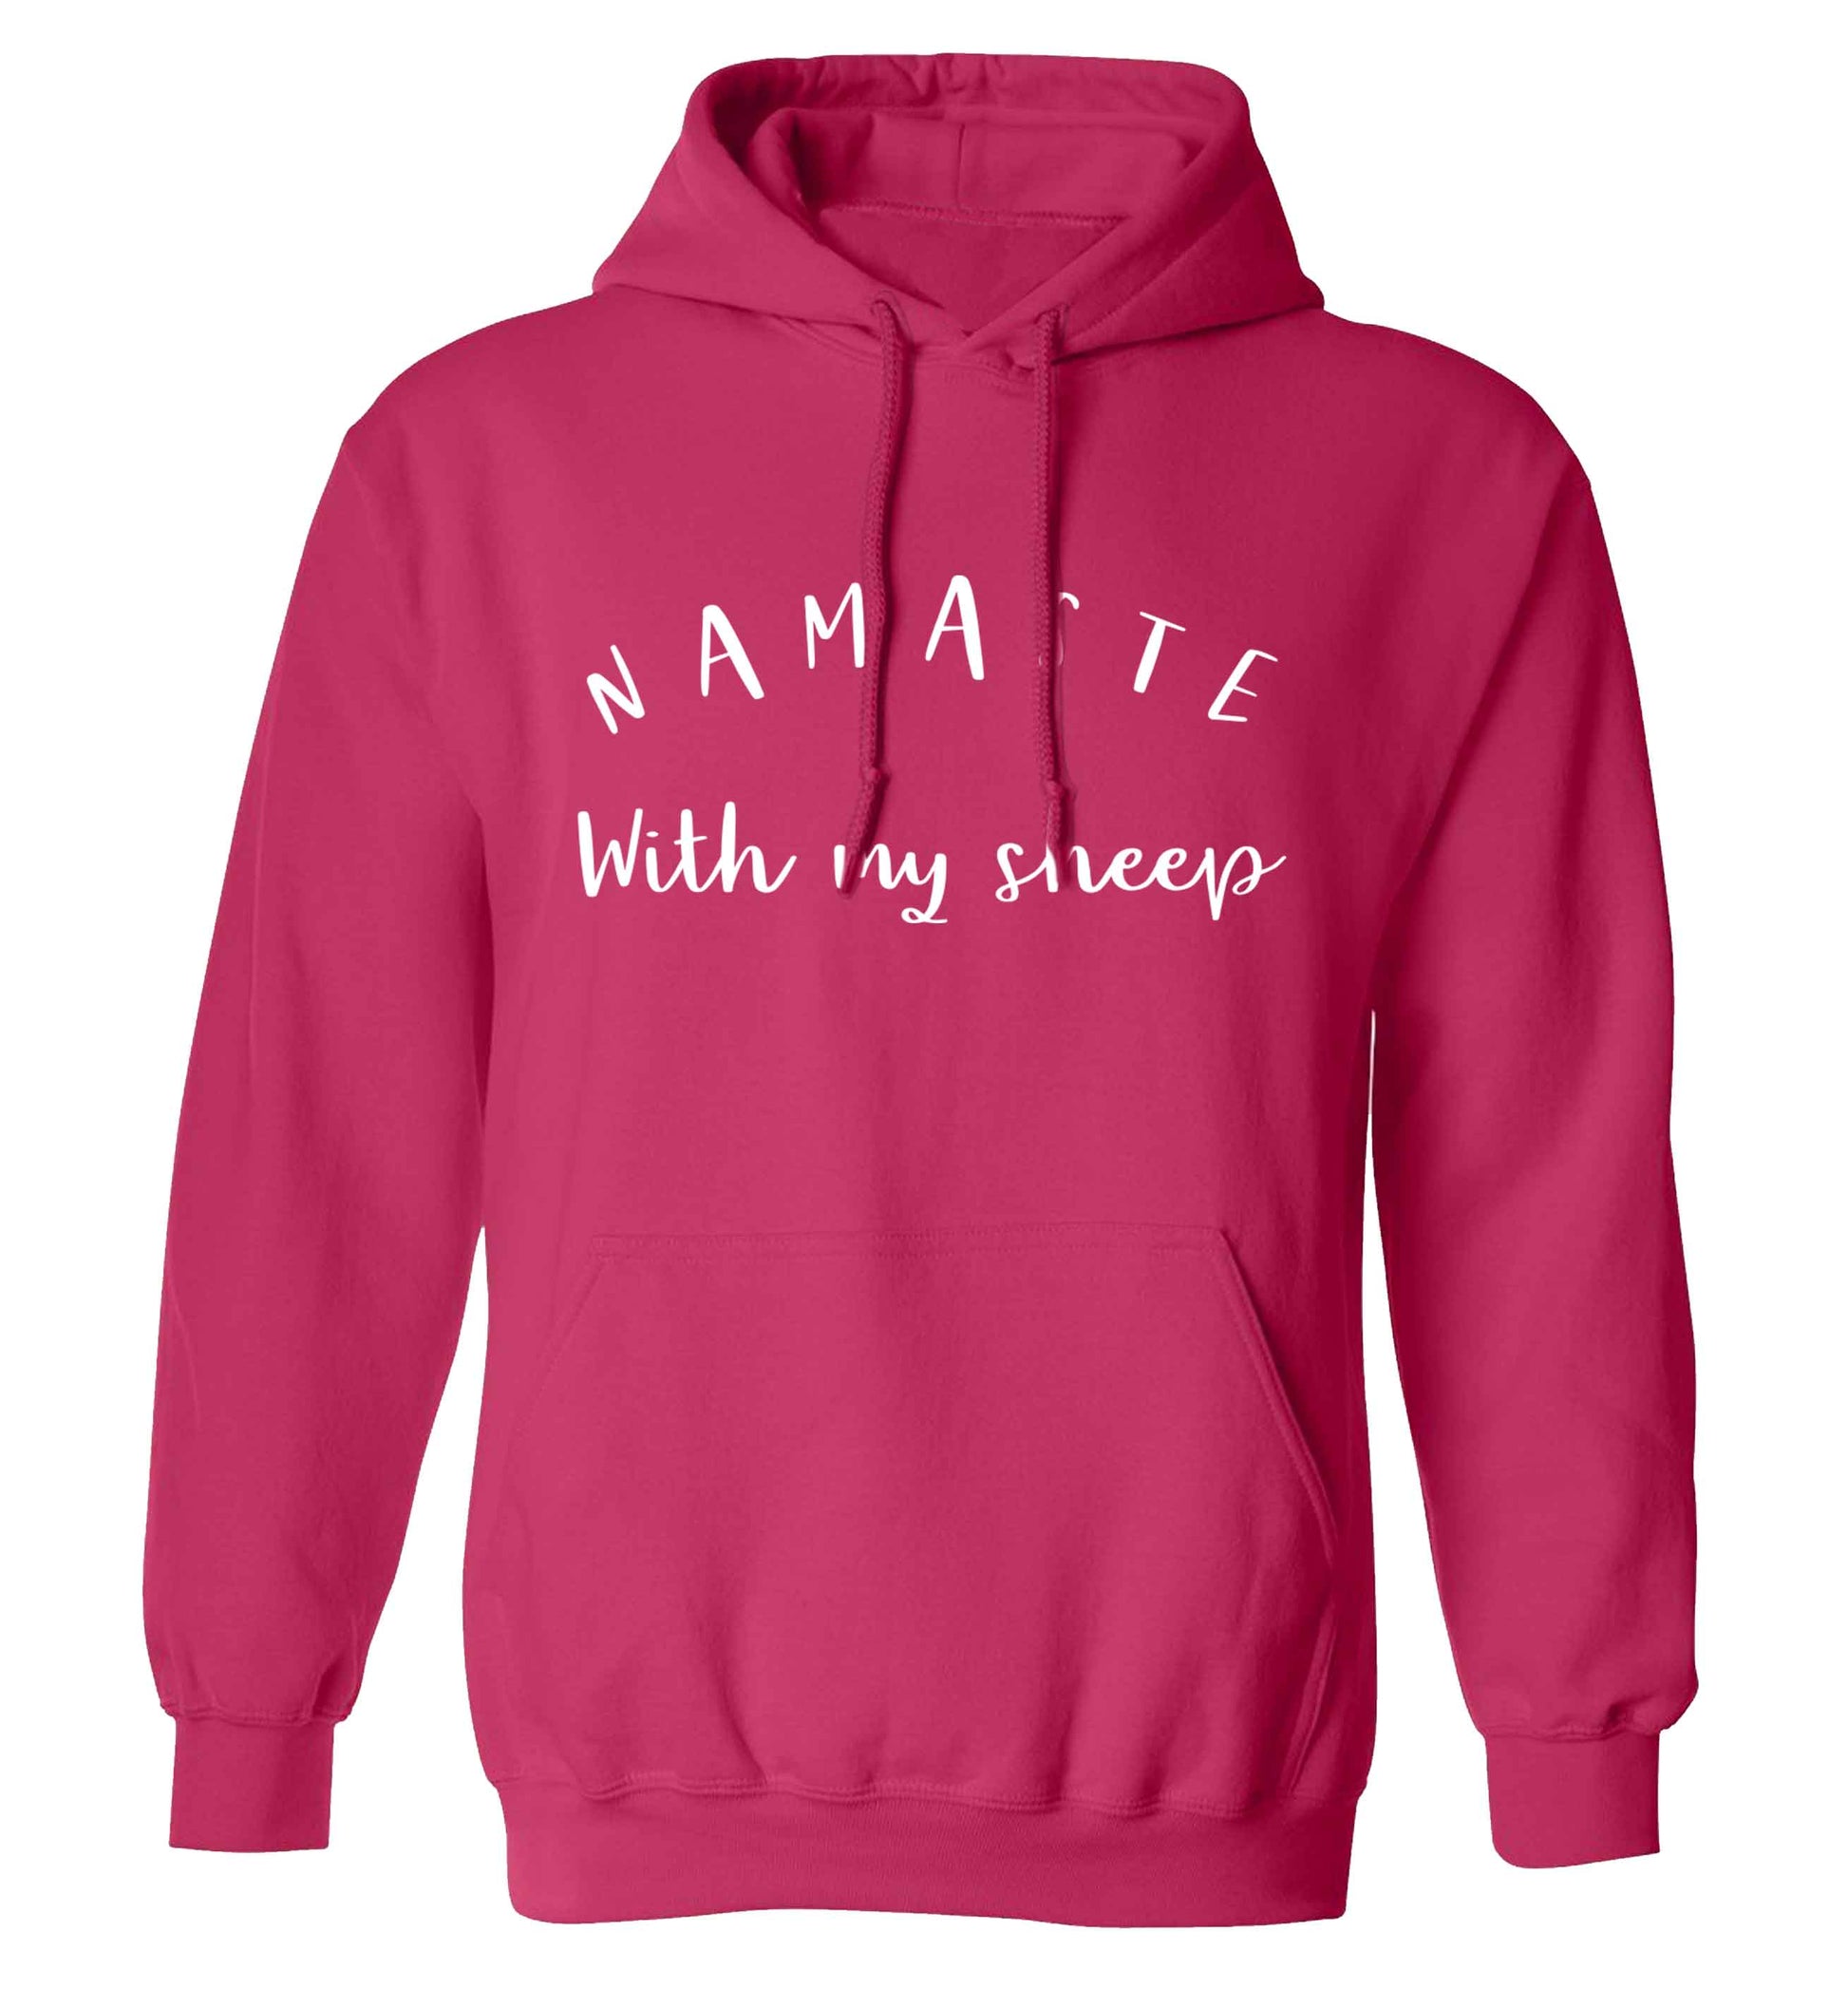 Namaste with my sheep adults unisex pink hoodie 2XL